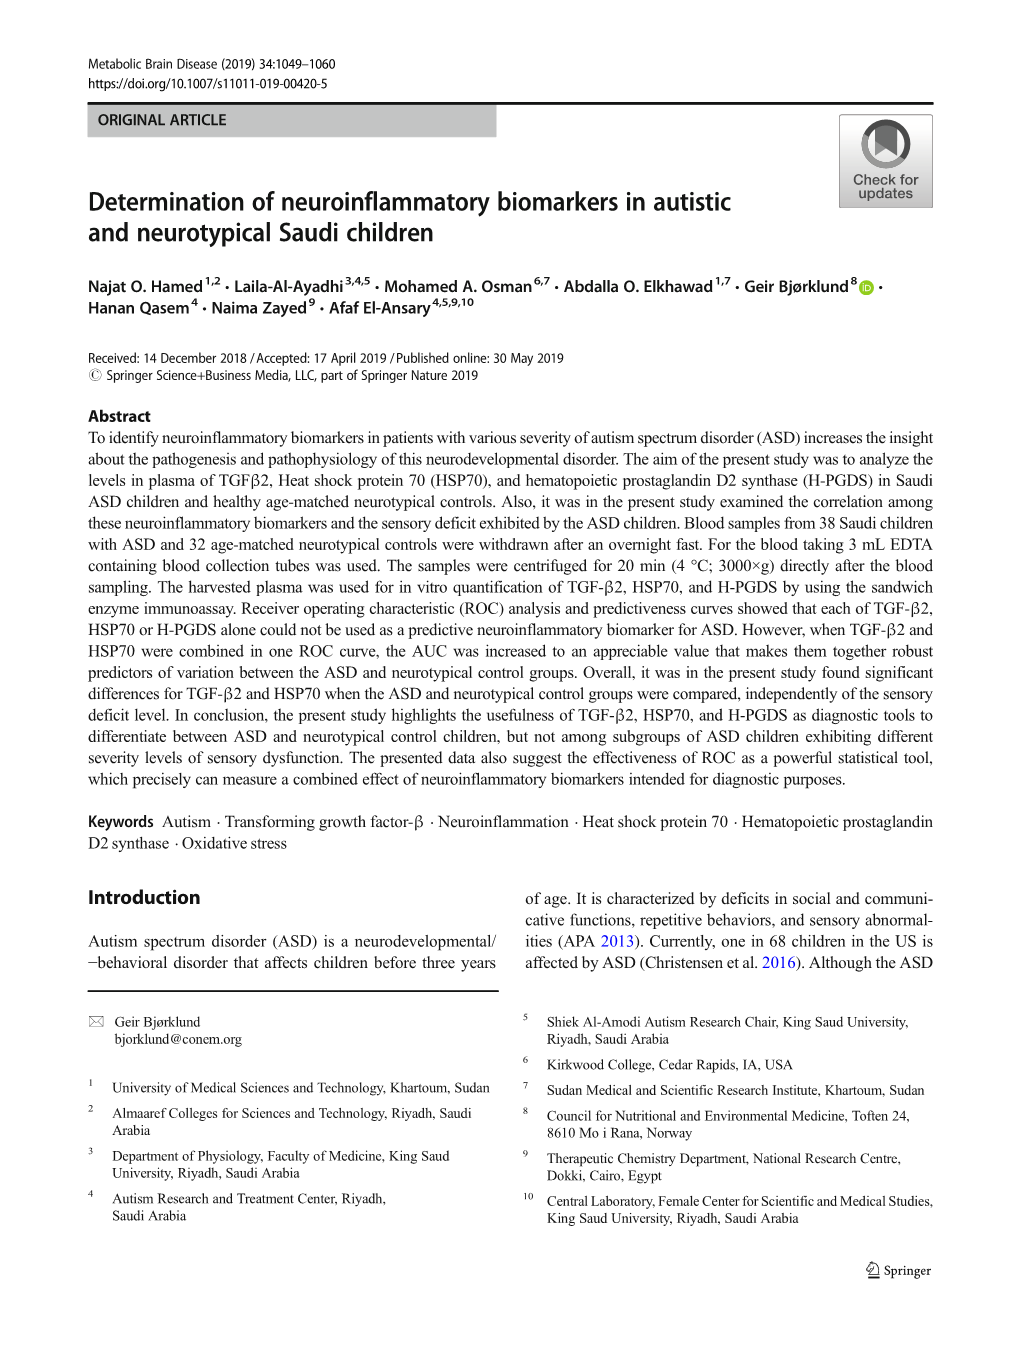 Determination of Neuroinflammatory Biomarkers in Autistic and Neurotypical Saudi Children